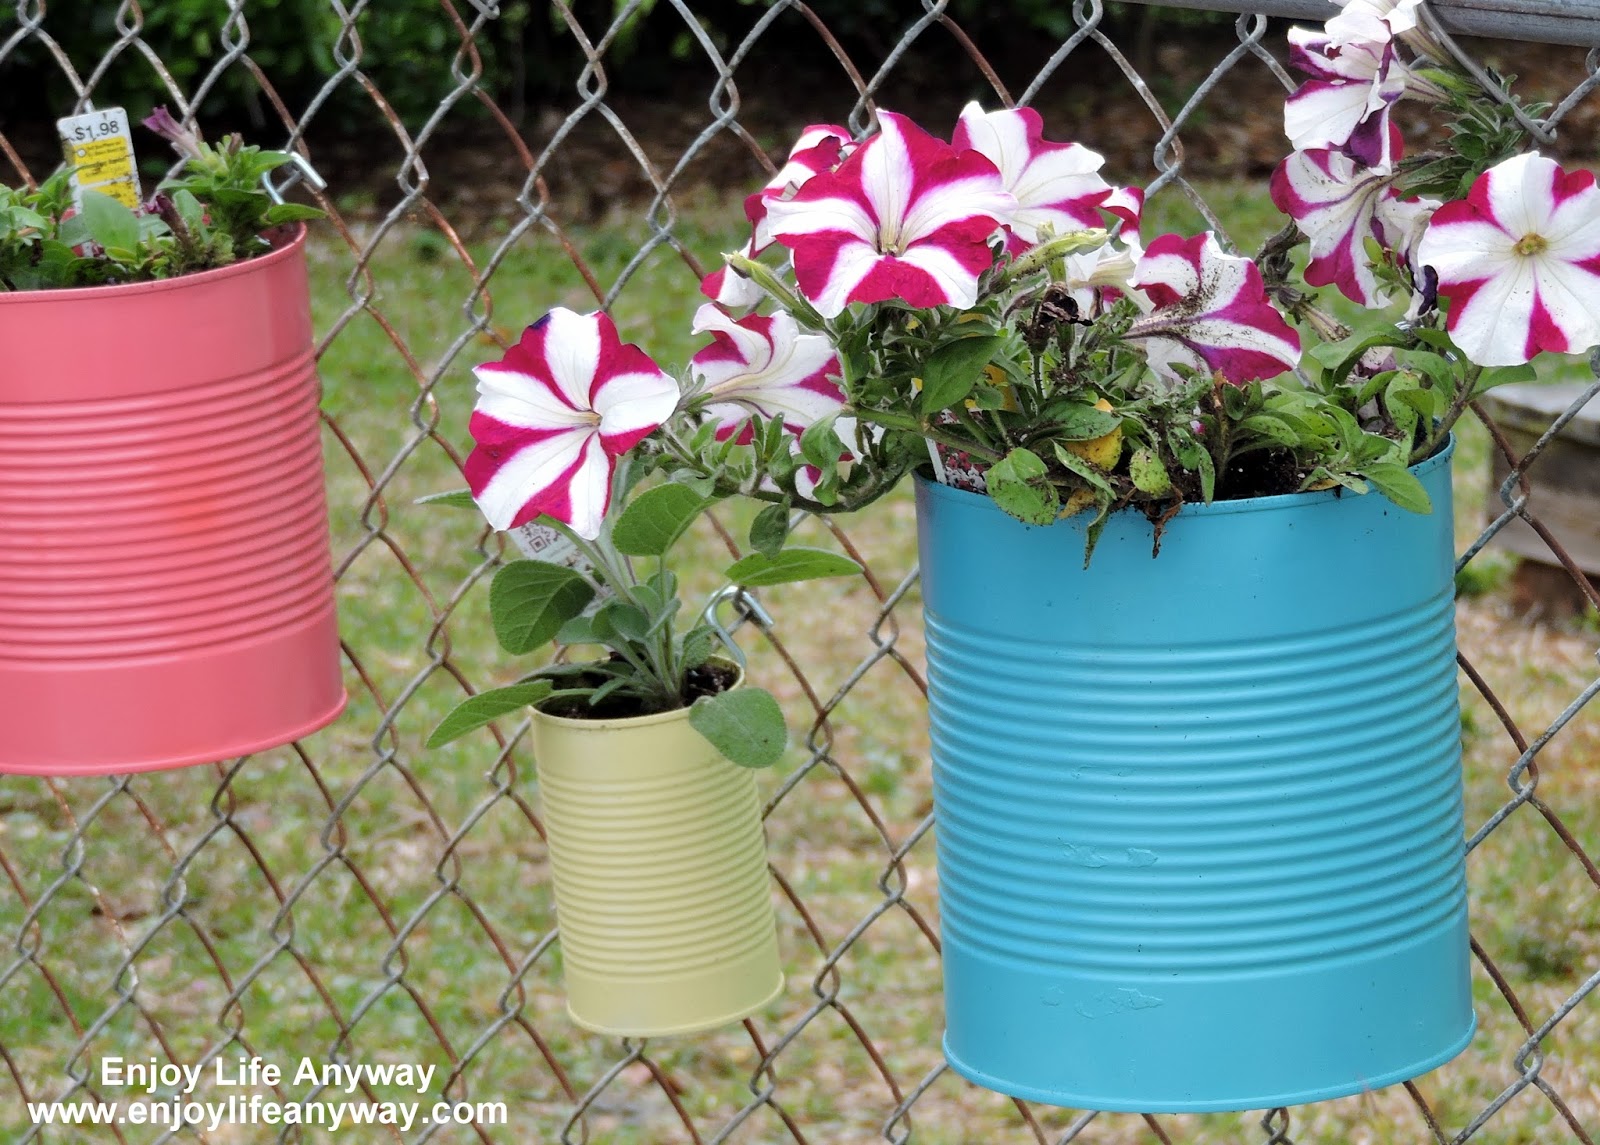 Enjoy Life Anyway: Dress Up A Fence With DIY Tin Can Planters